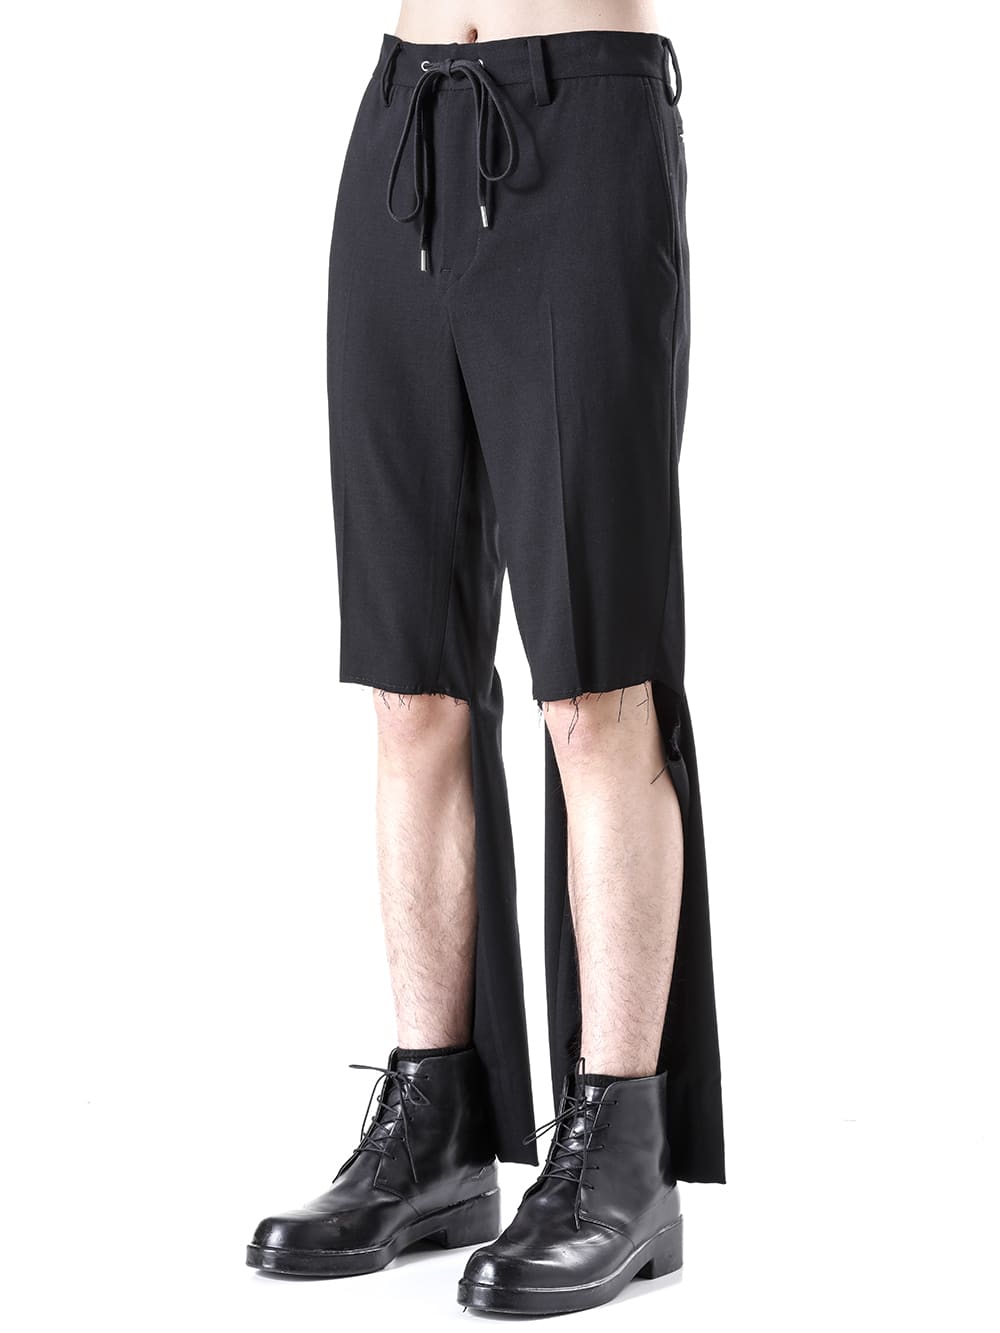 two-way plain front pant.